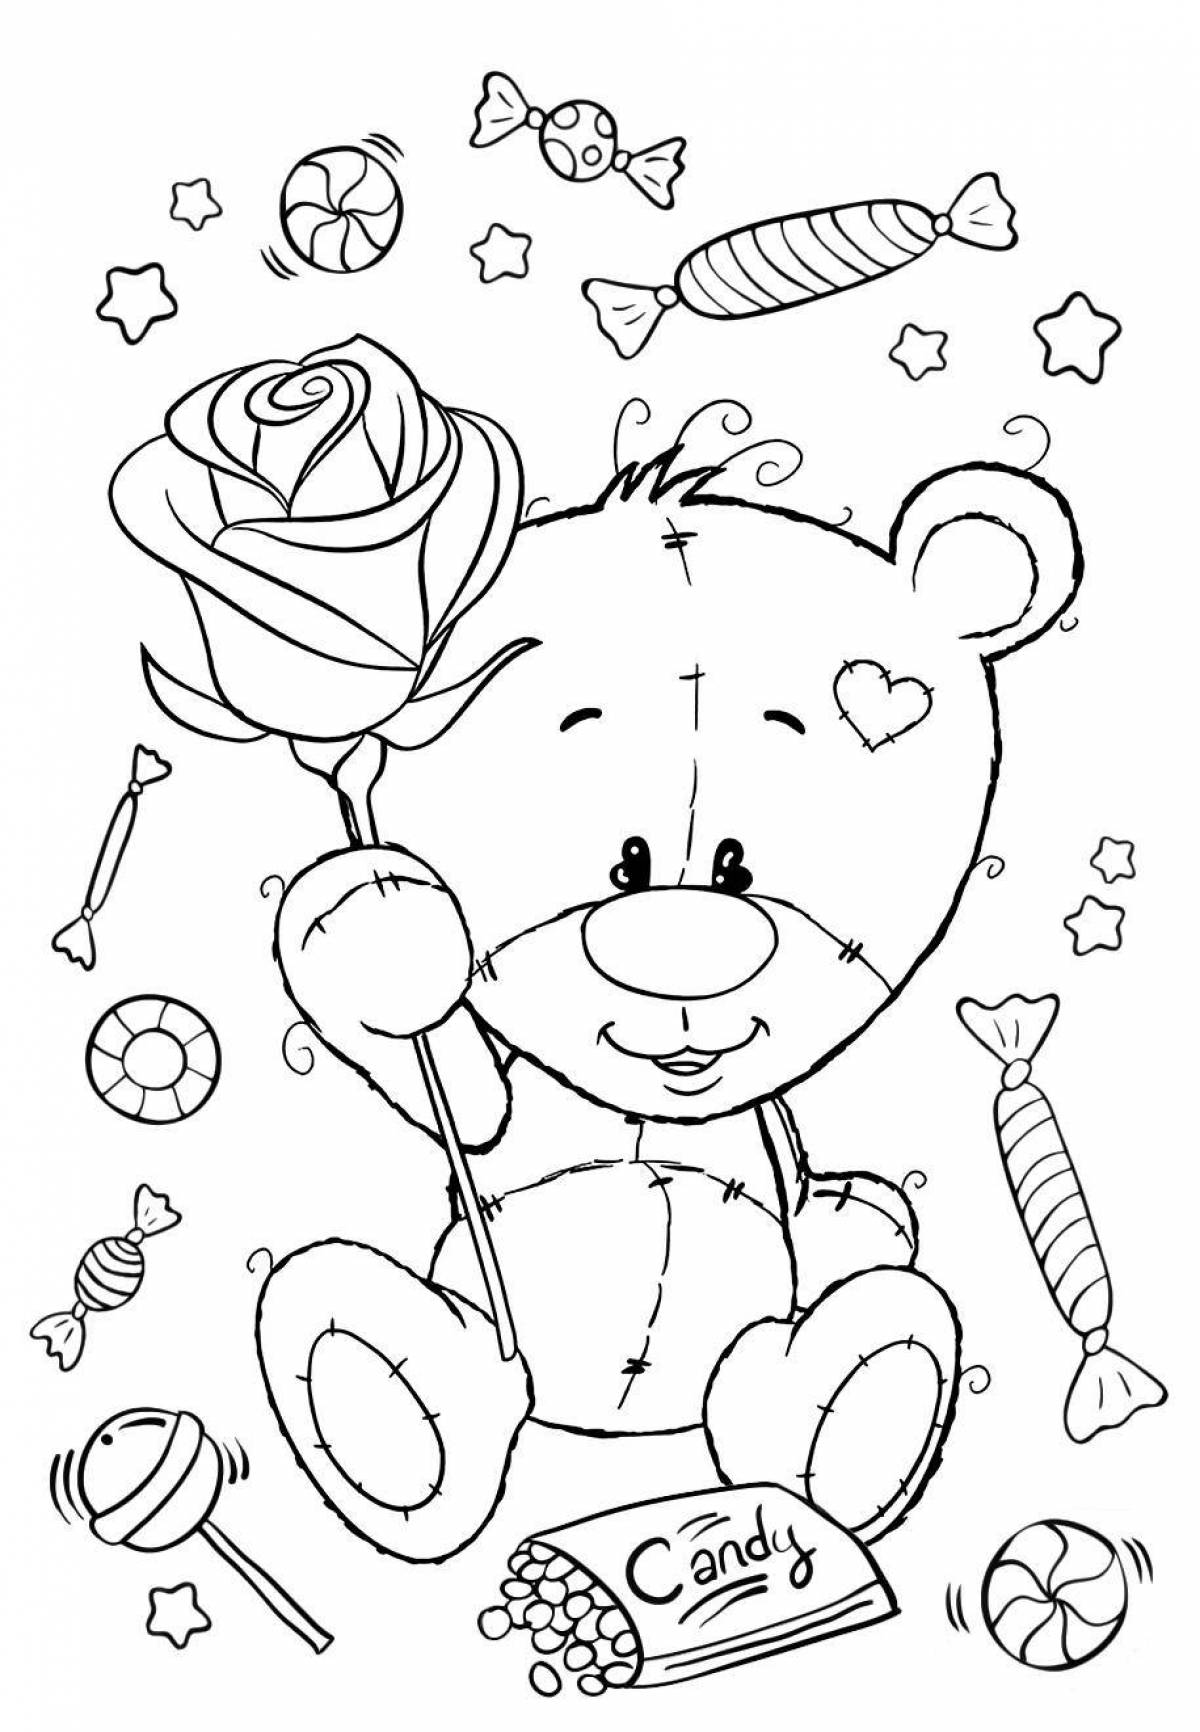 Radiant bear with flowers